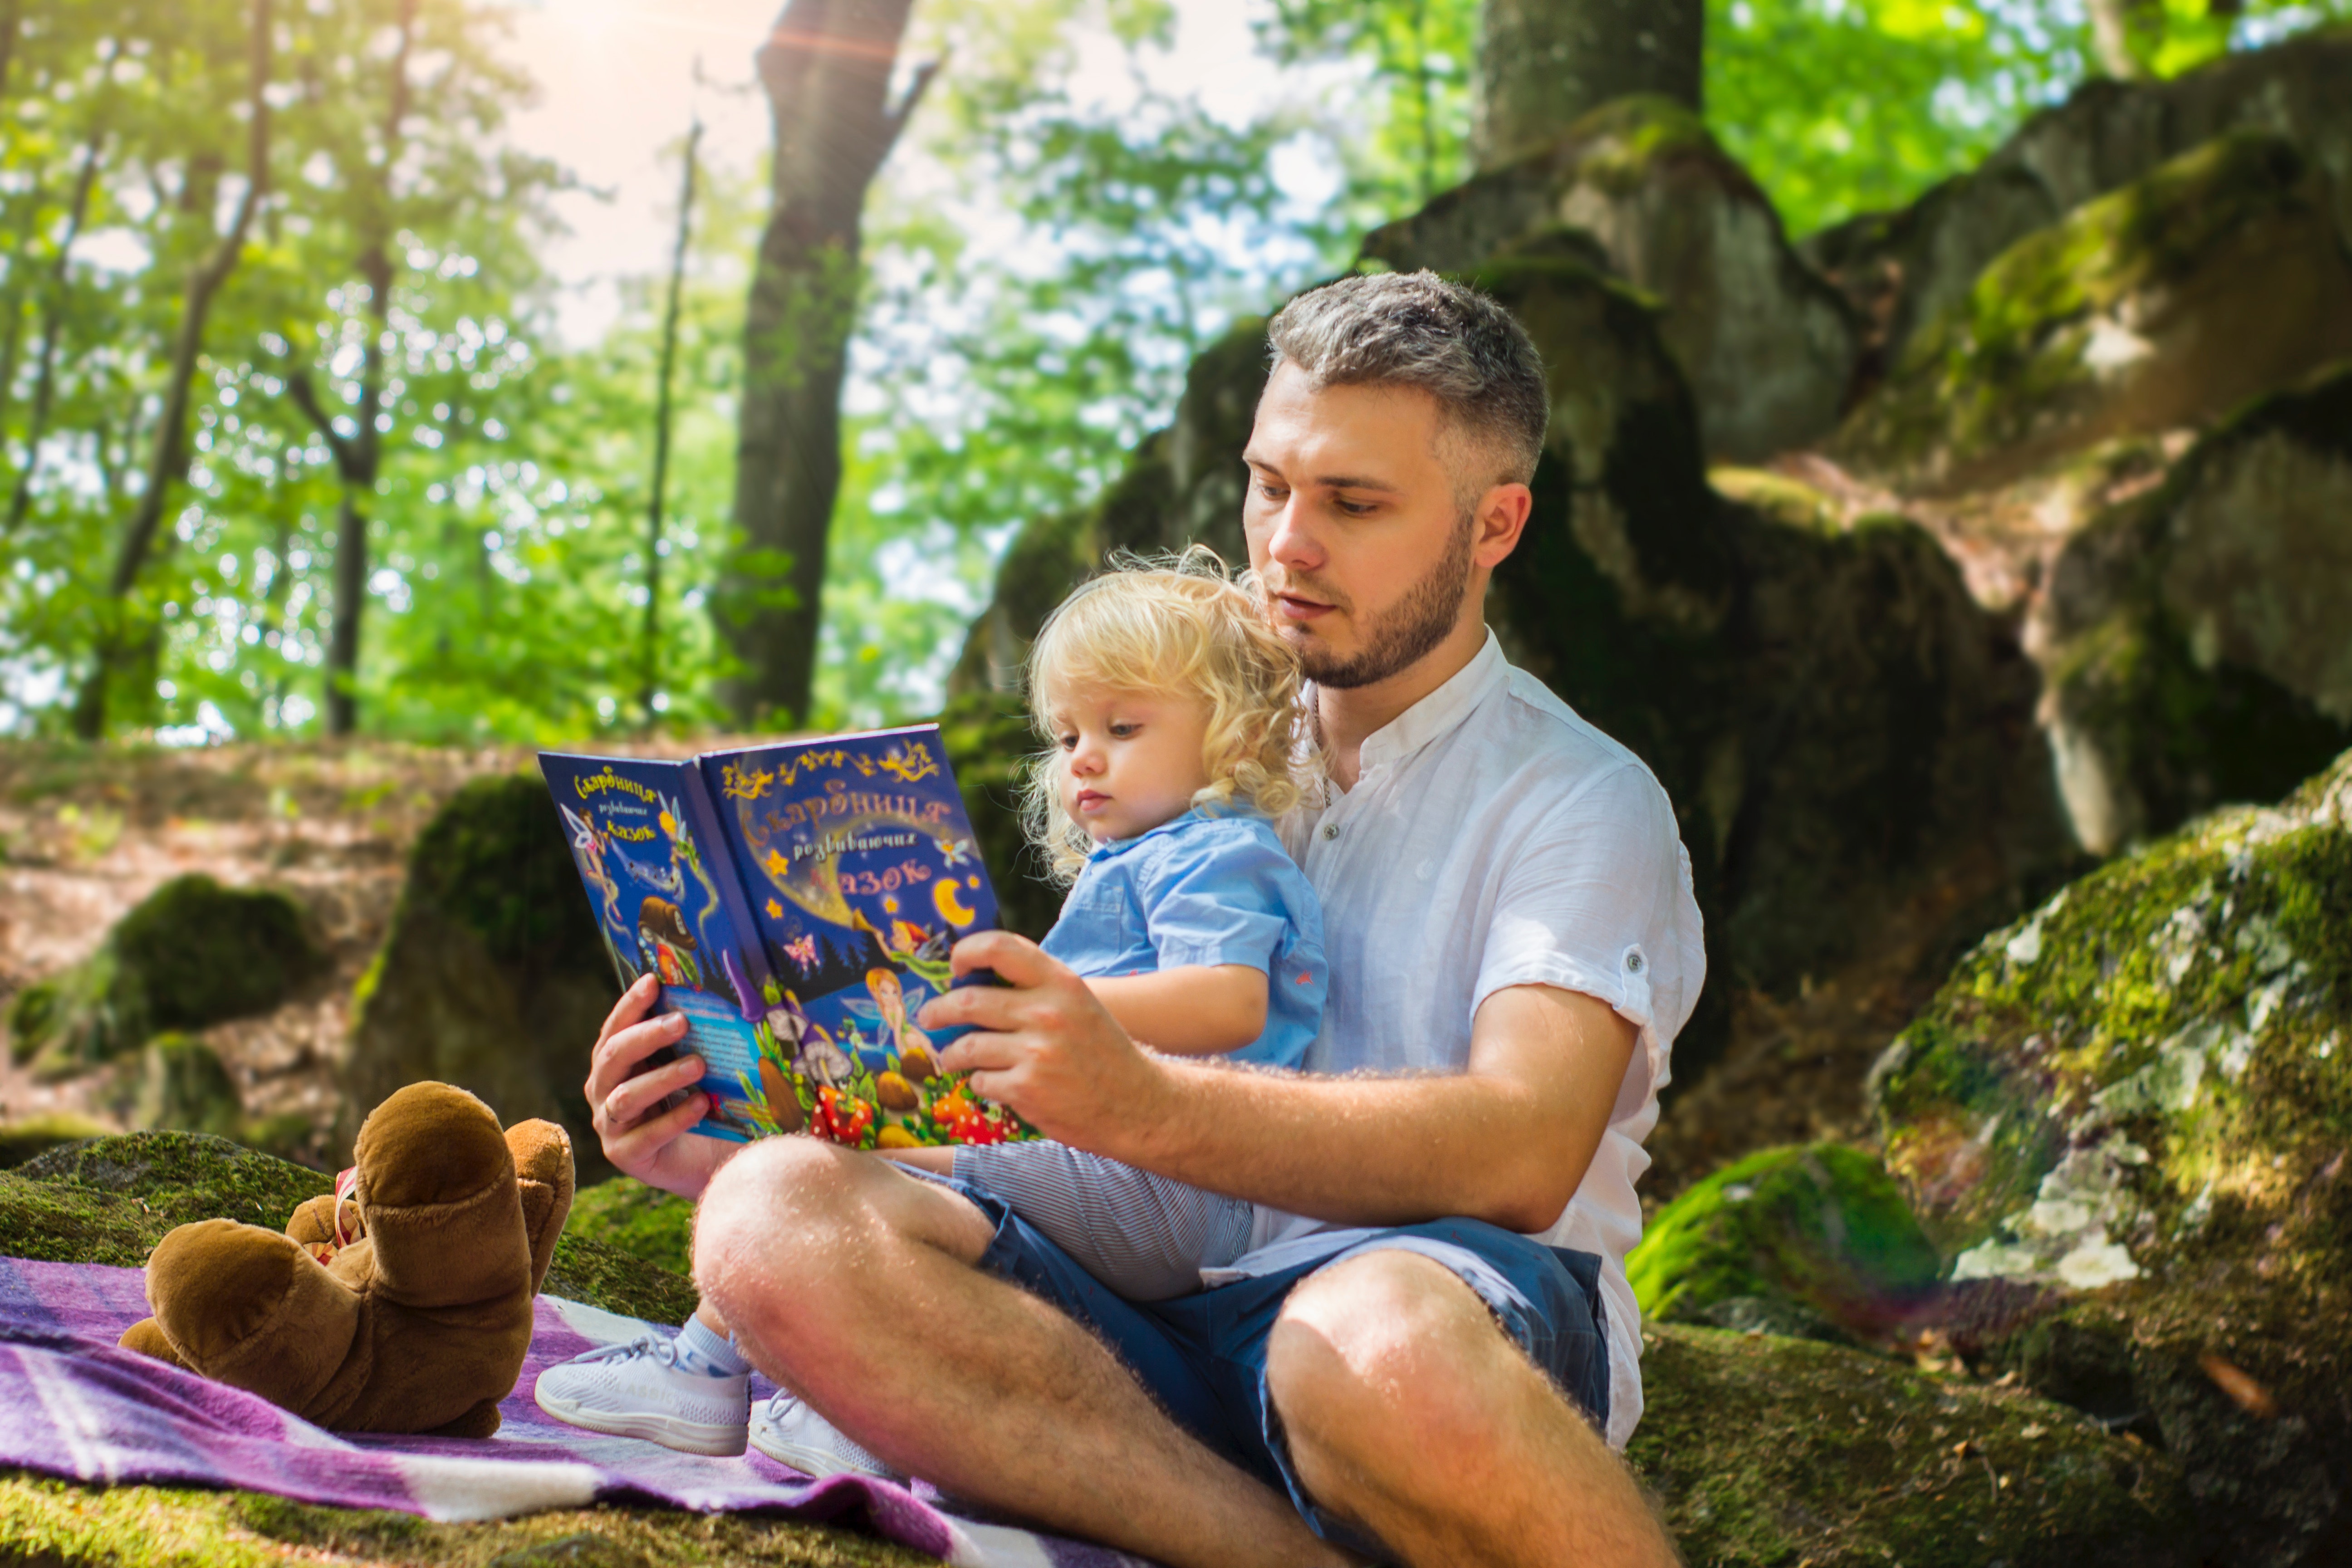 Tips to Choose Good Books for 6-12 Months Old Baby